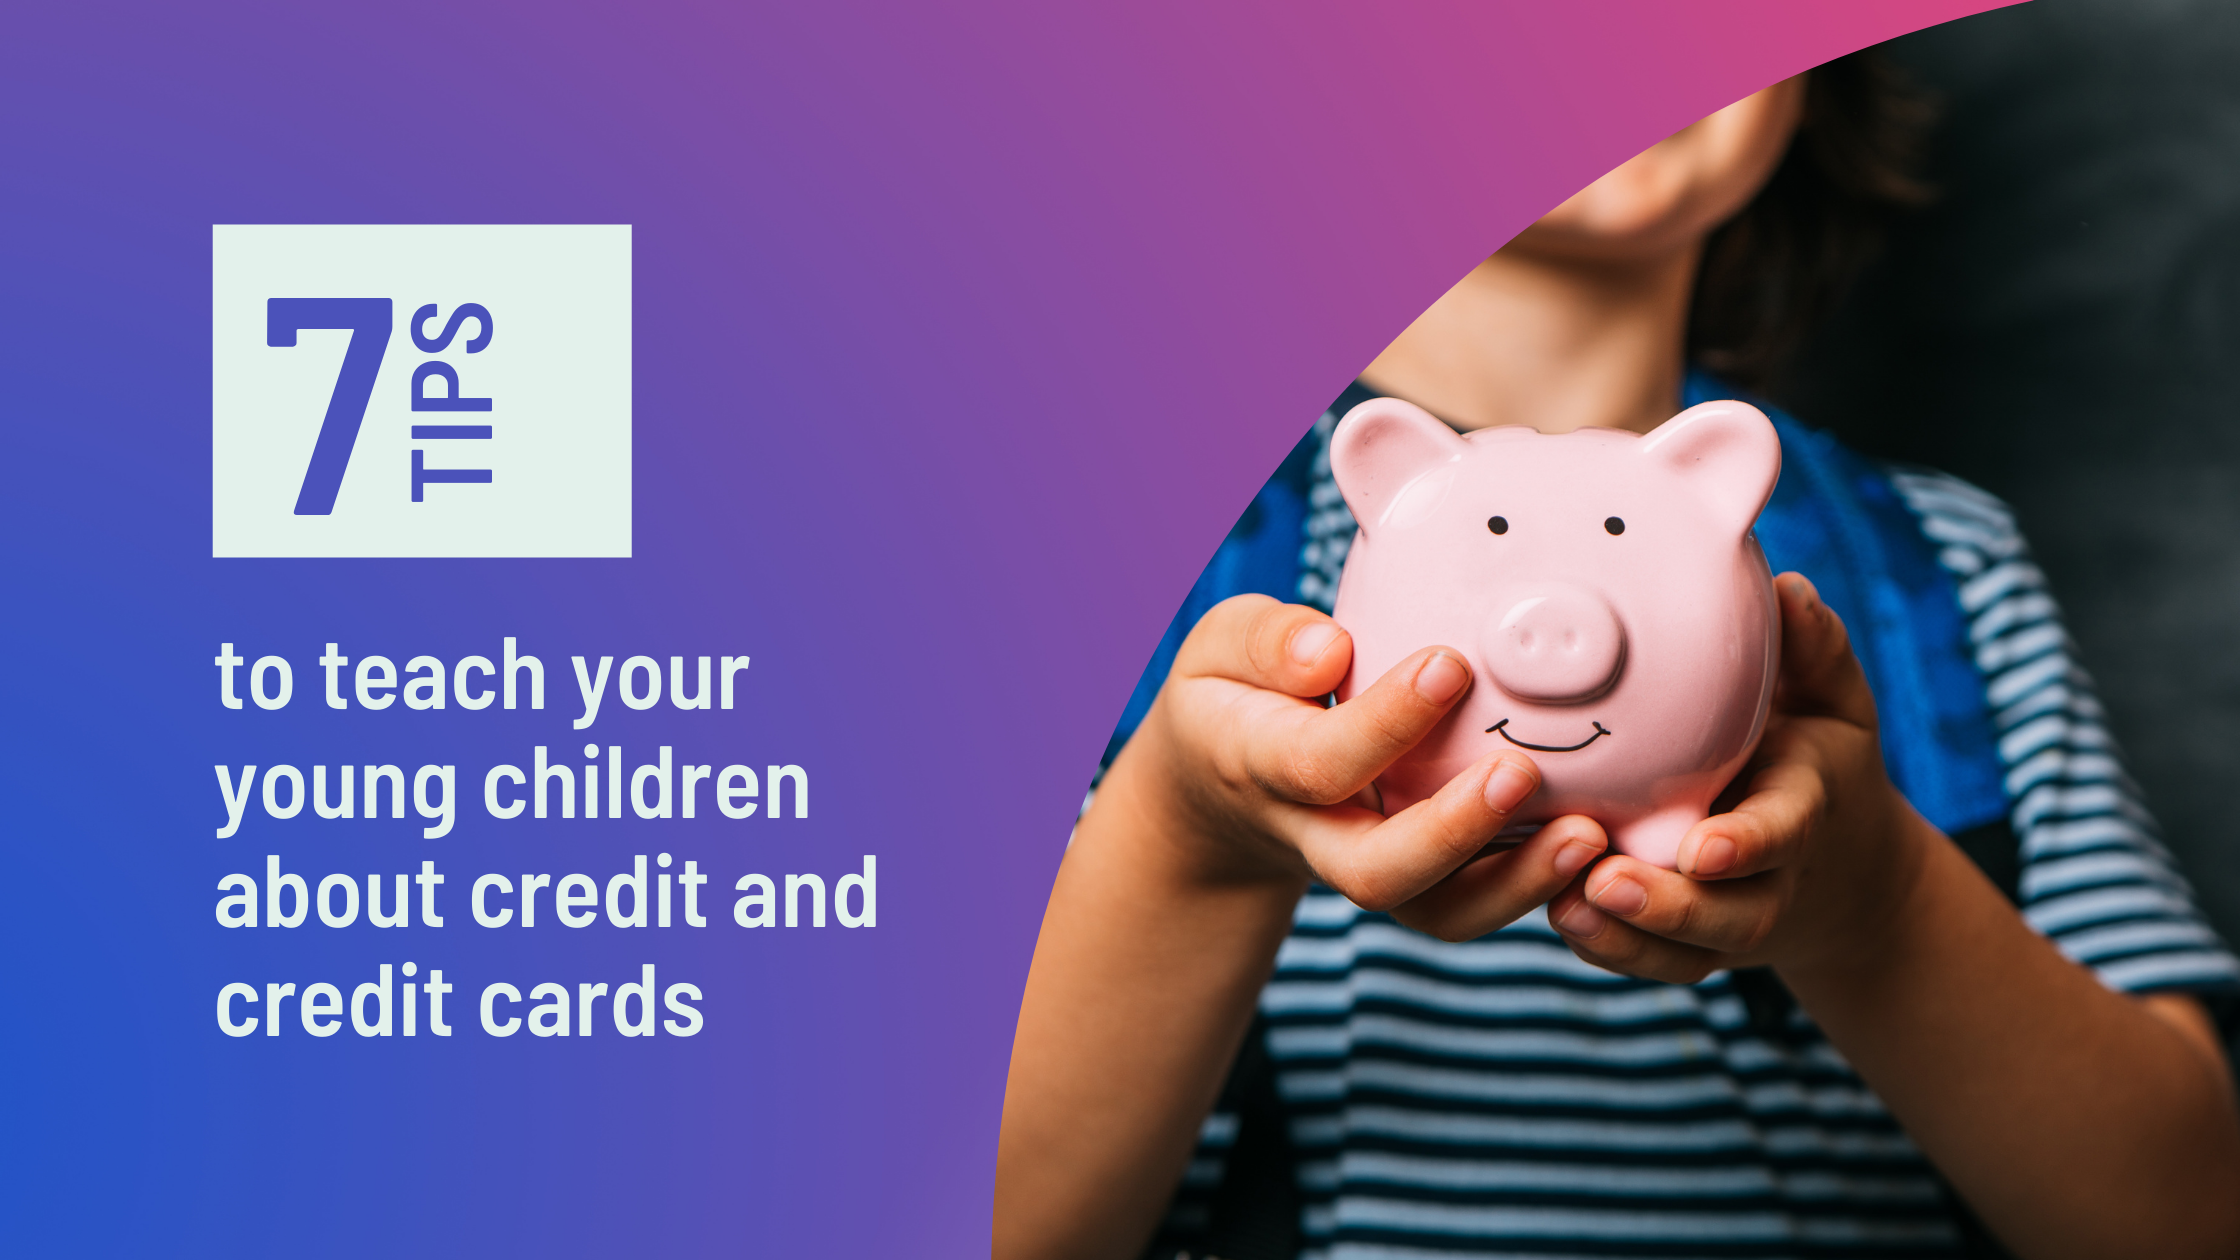 7 Tips to teach your young children about credit and credit cards